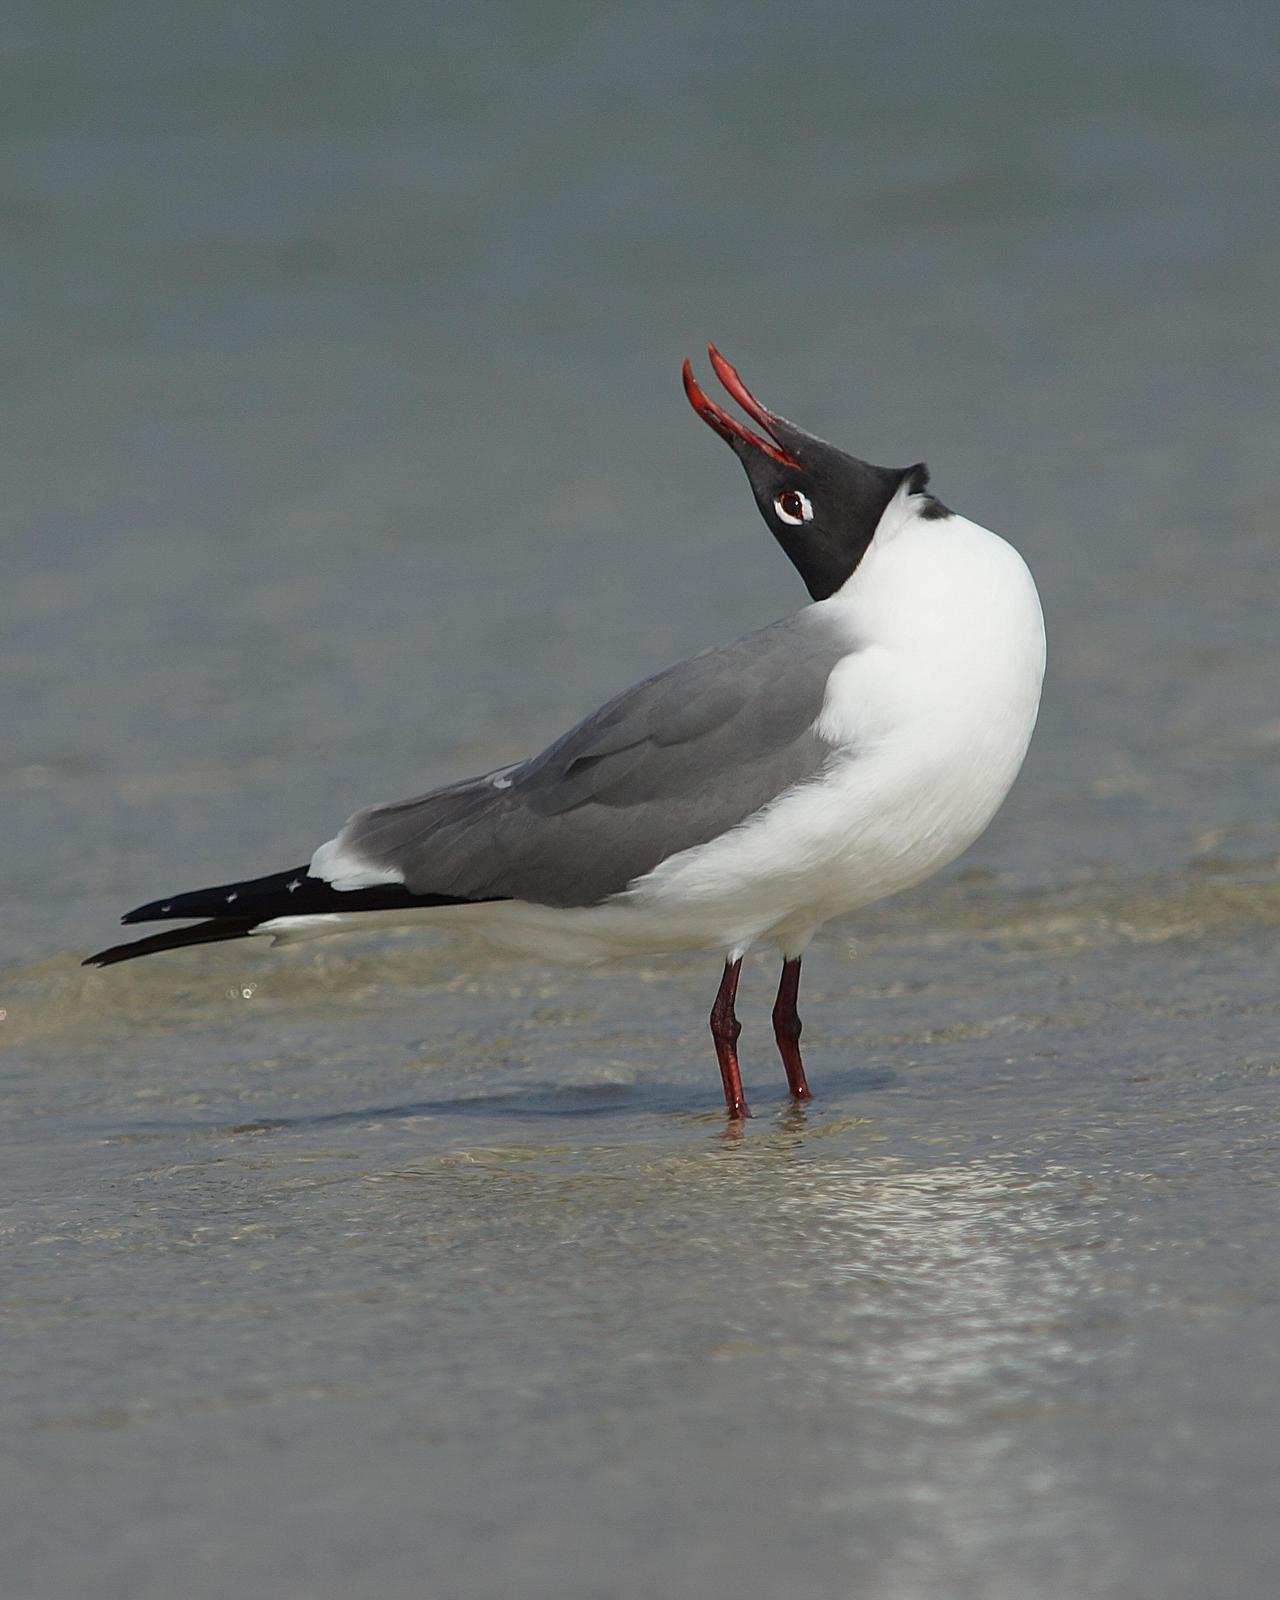 Laughing Gull Photo by Steve Percival